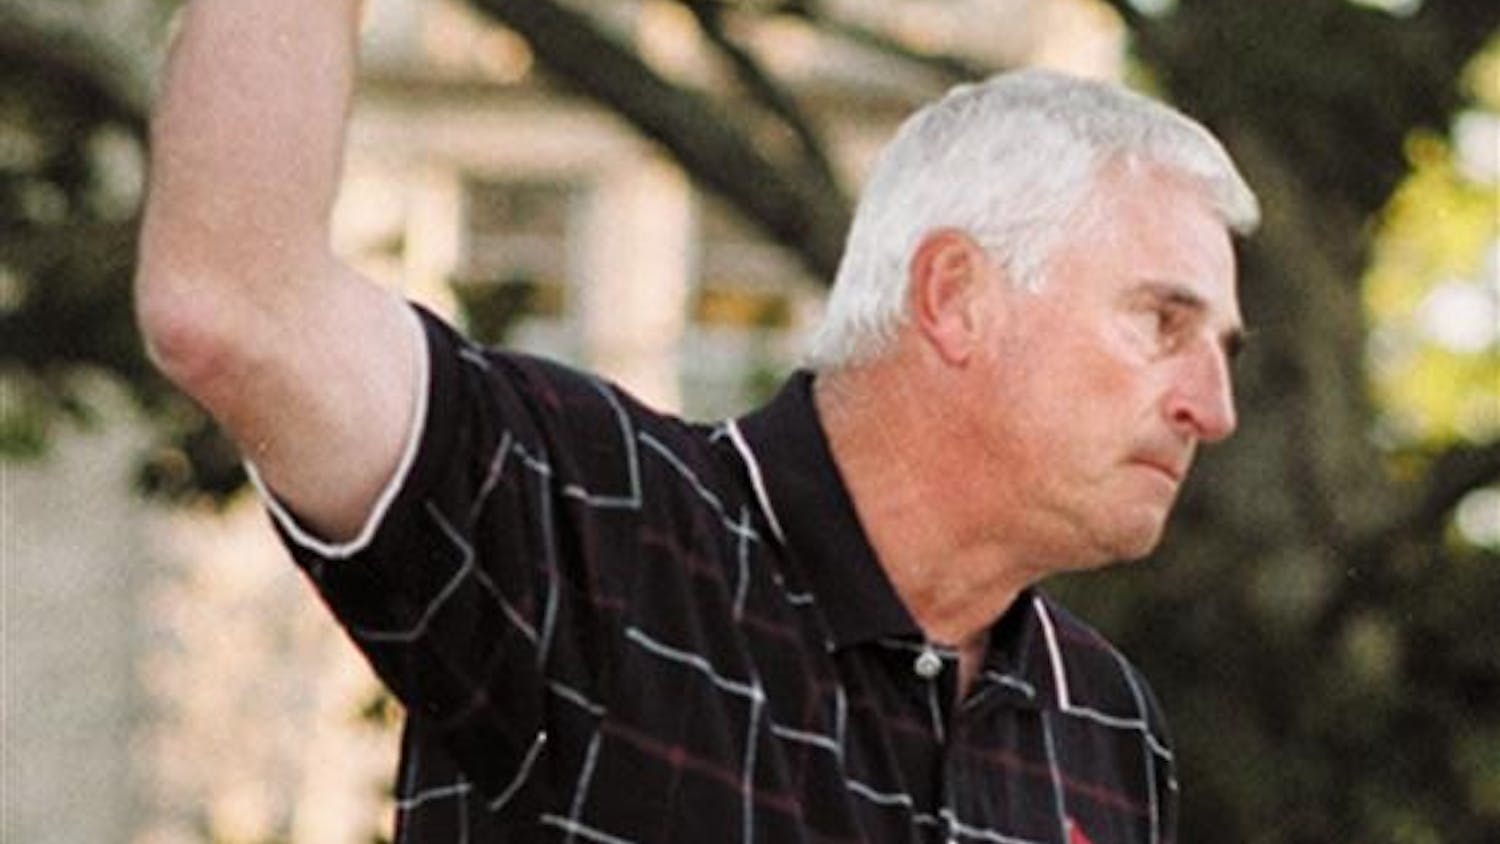 Bob Knight makes his final wave goodbye after asking the student body to bow their heads and wish the best for him and his family in 2008.